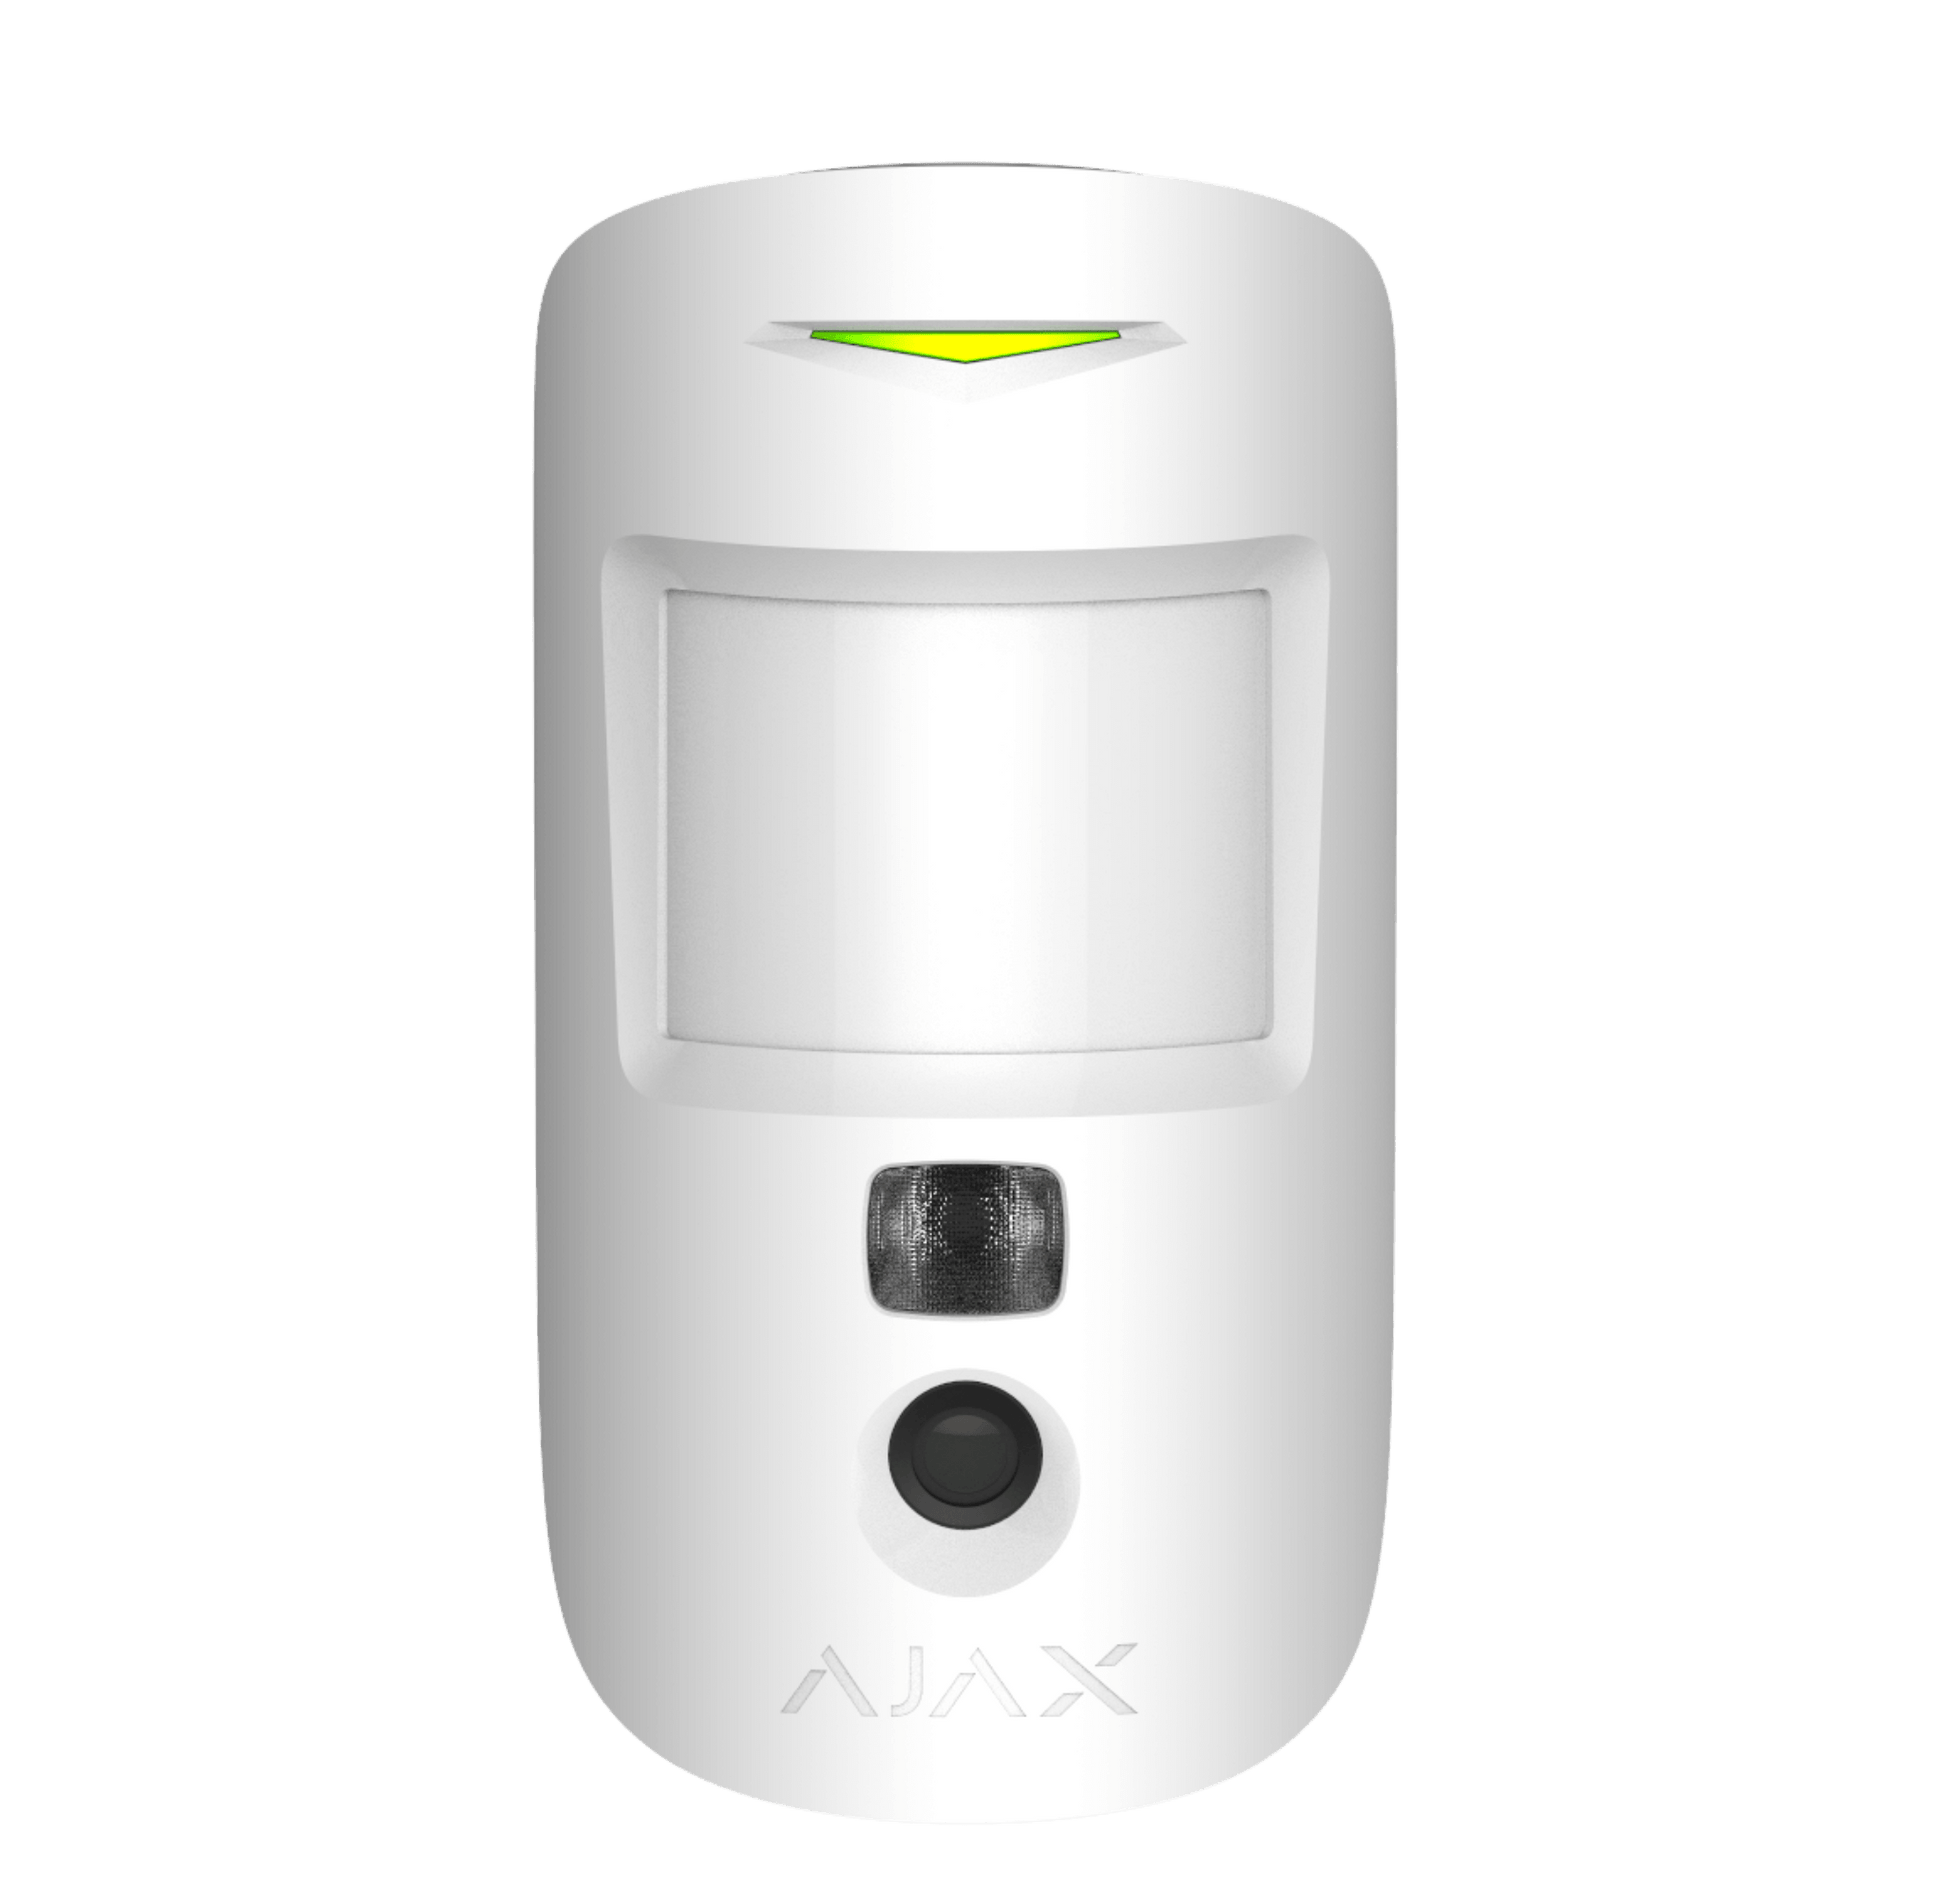 White Ajax MotionCam a wireless motion detector with a built in camera for home and business security, 110 × 65 × 50 mm in size, 86 grams in weight. front view of device